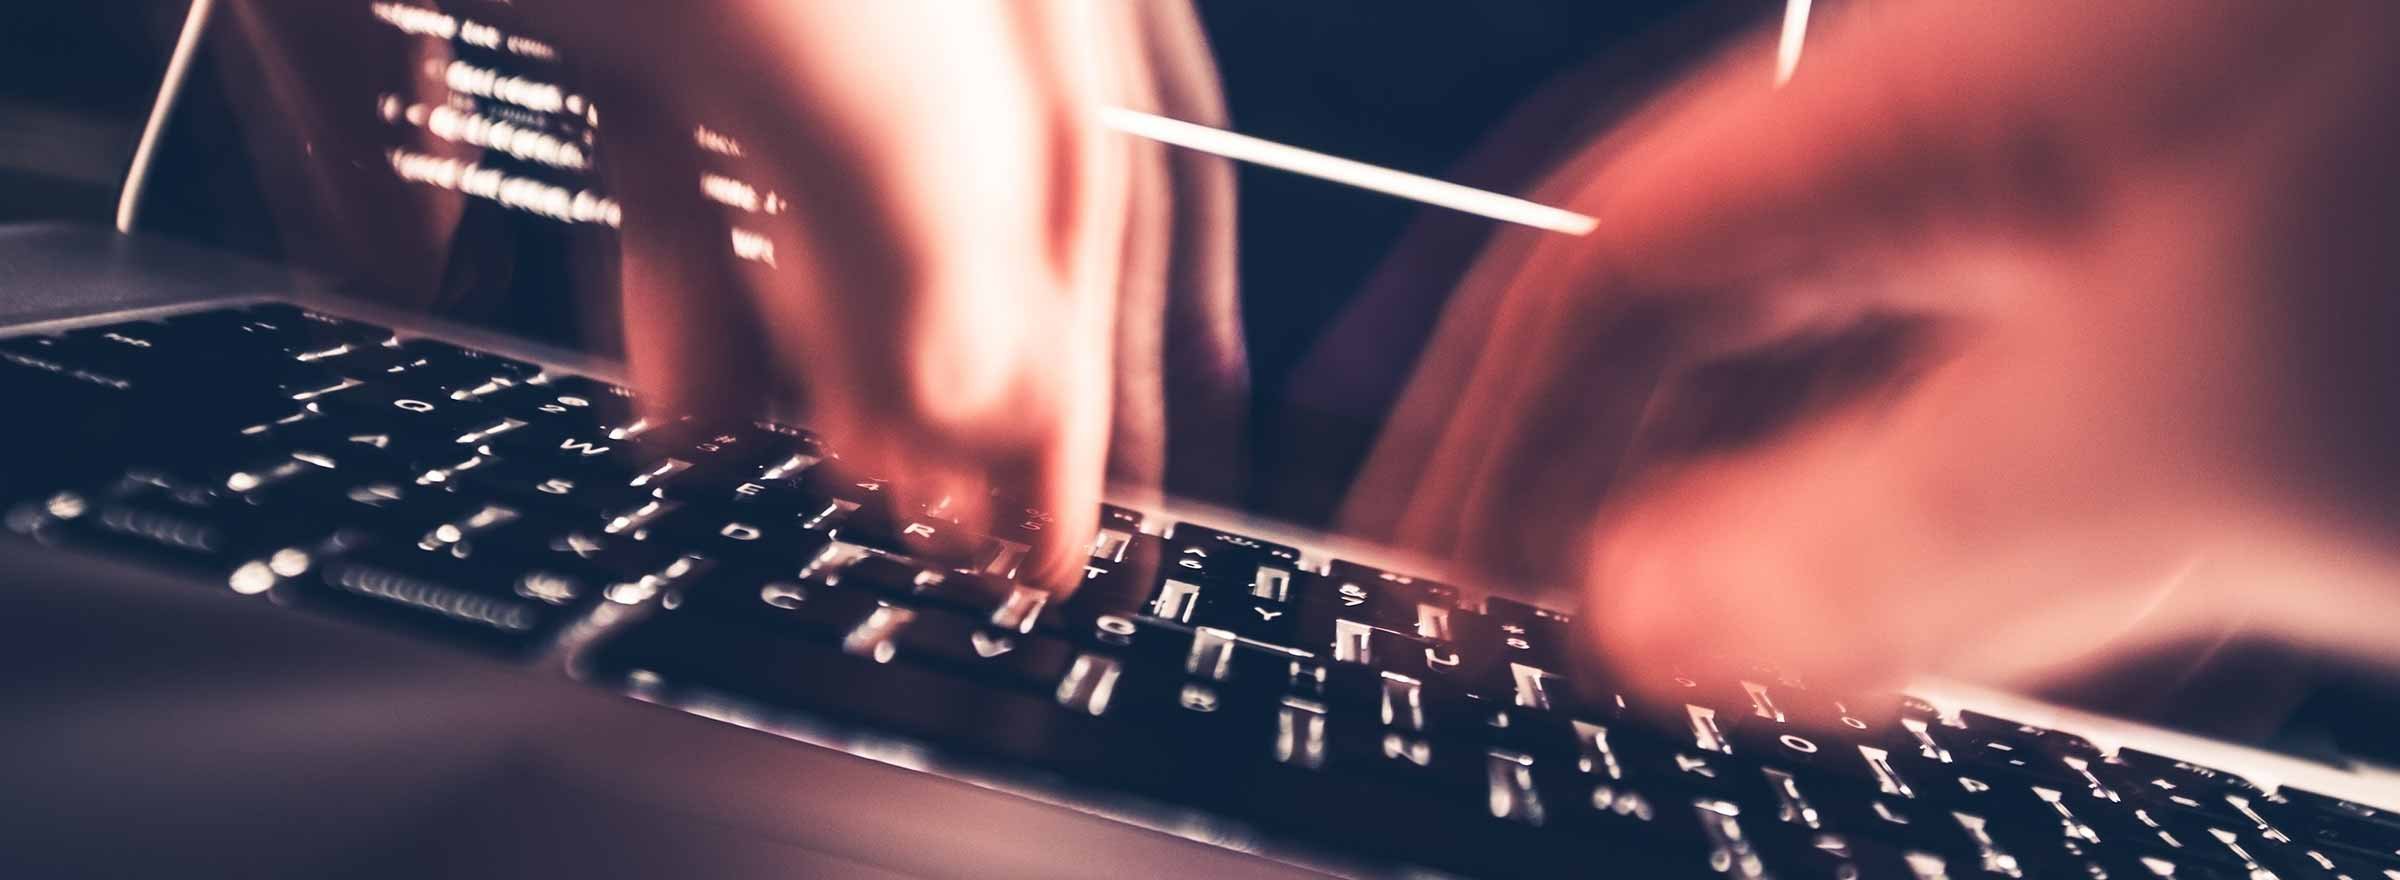 blurry photo of hands typing on a laptop keyboard